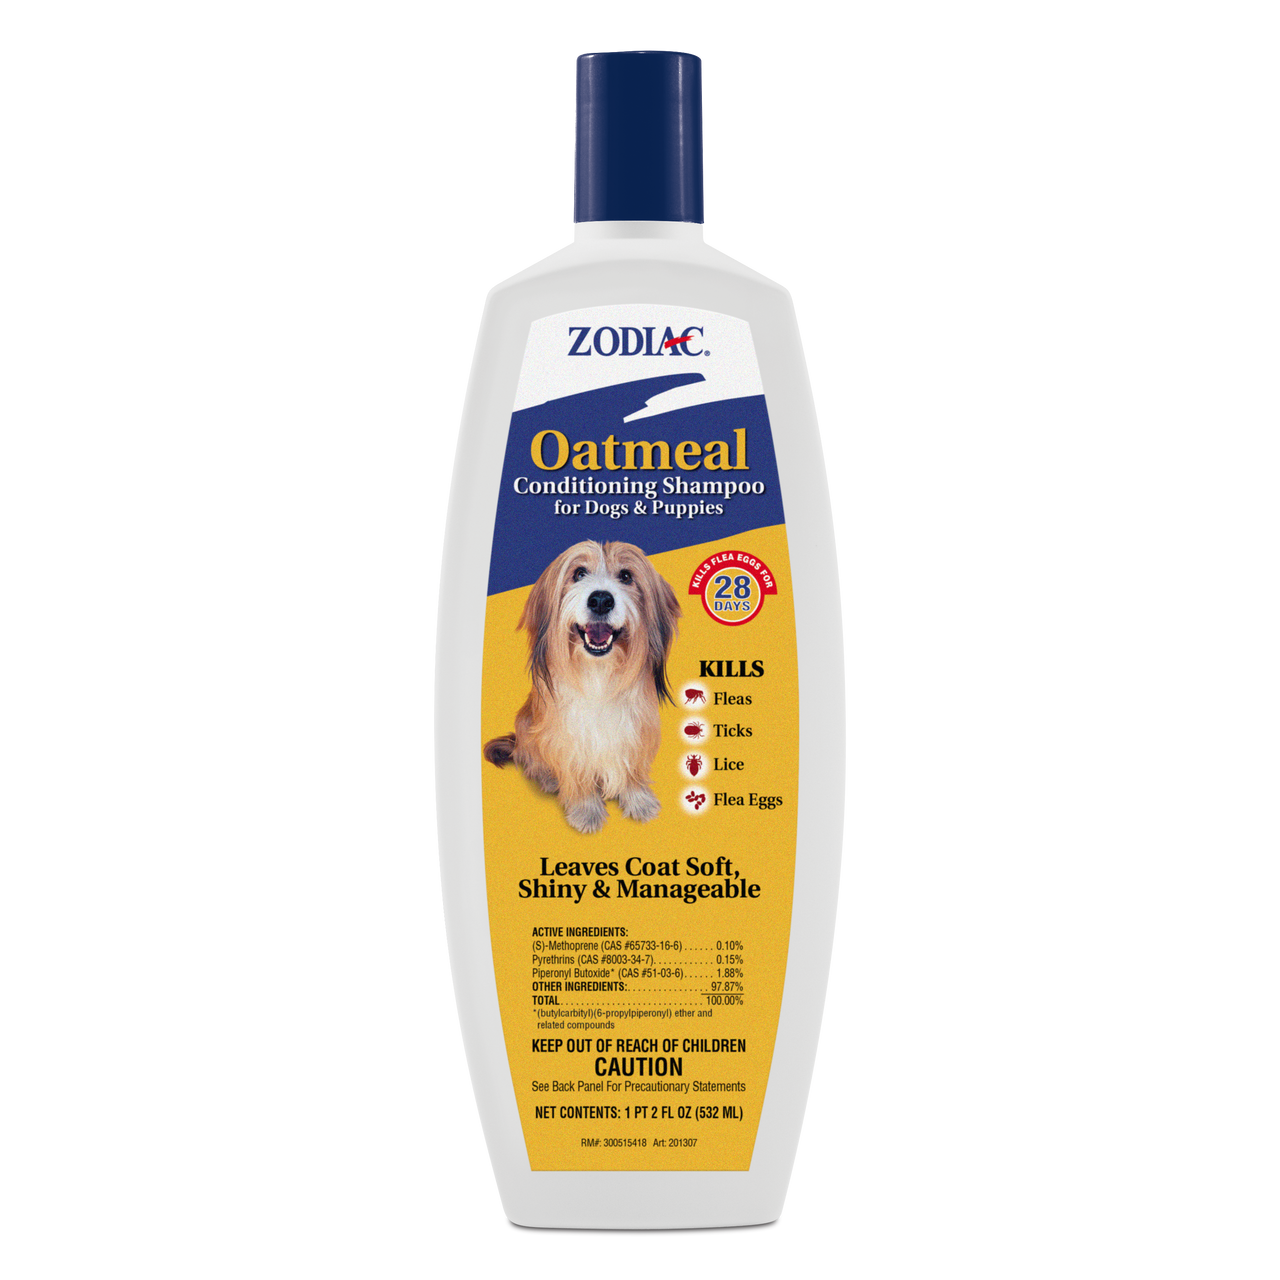 Zodiac Oatmeal Conditioning Shampoo for Dogs & Puppies 18 ounces